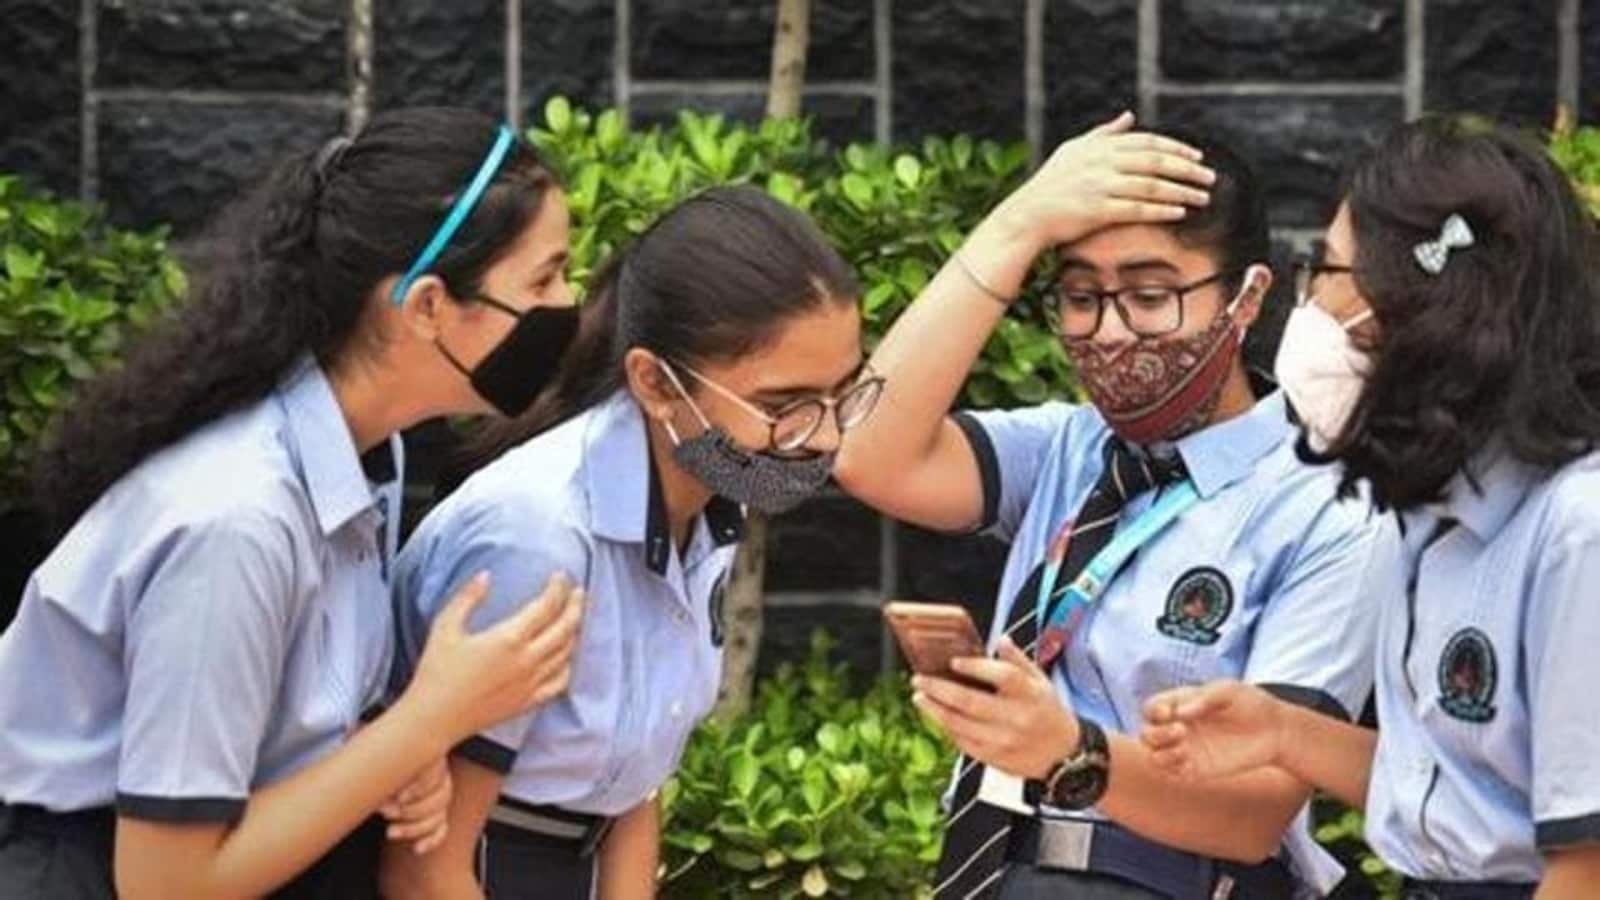 WBBSE Madhyamik Class 10th results announced, check here at @ wbresults.nic.in